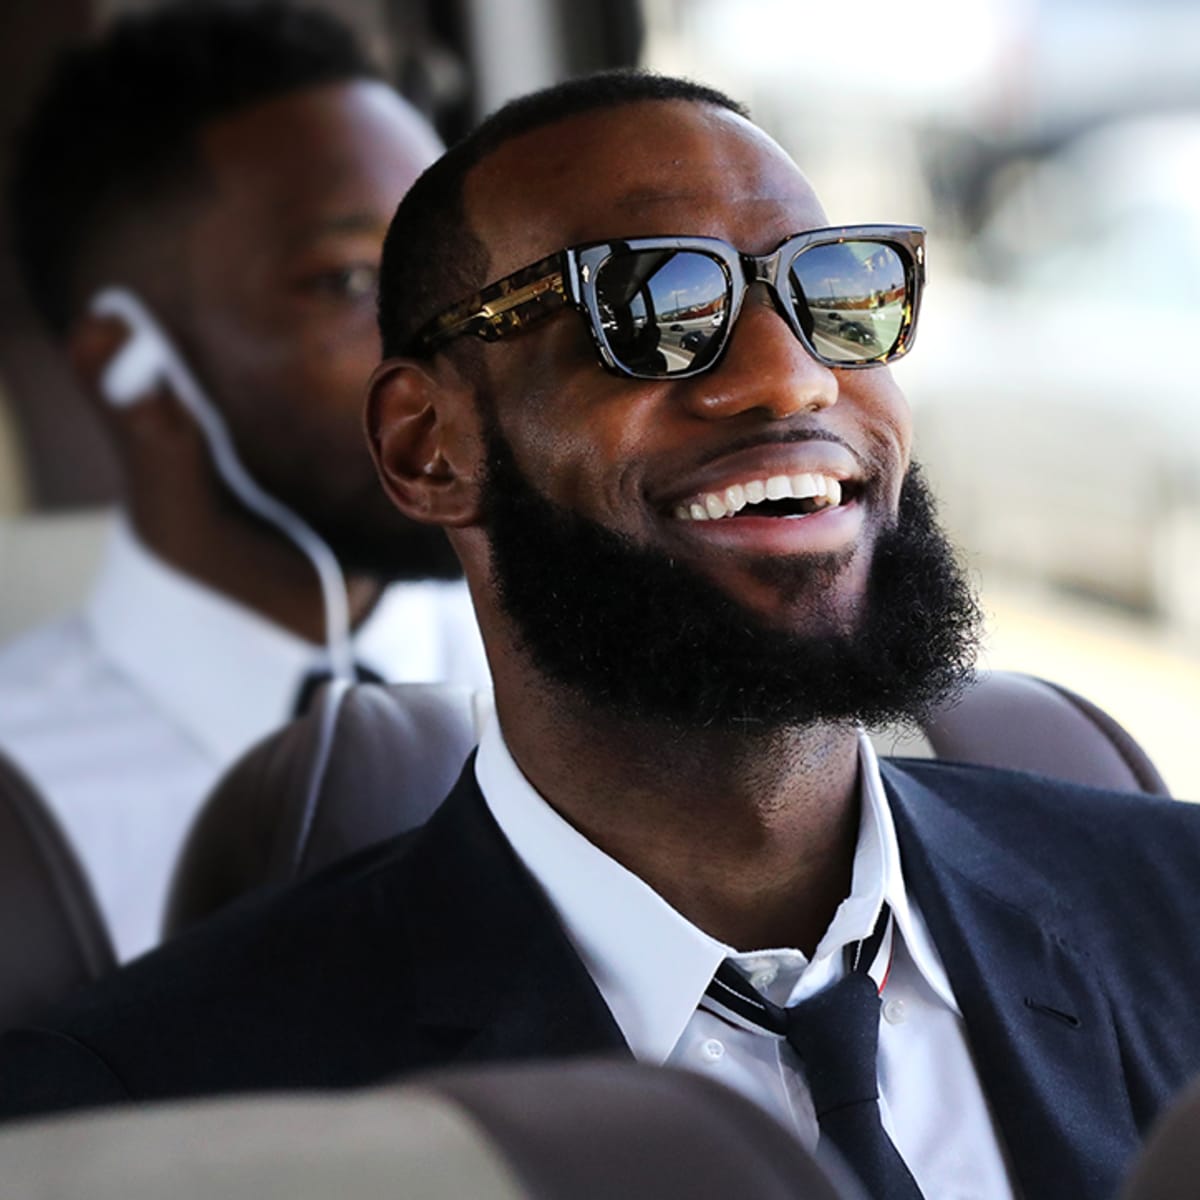 See LeBron James' greatest suits through the years, from oversized